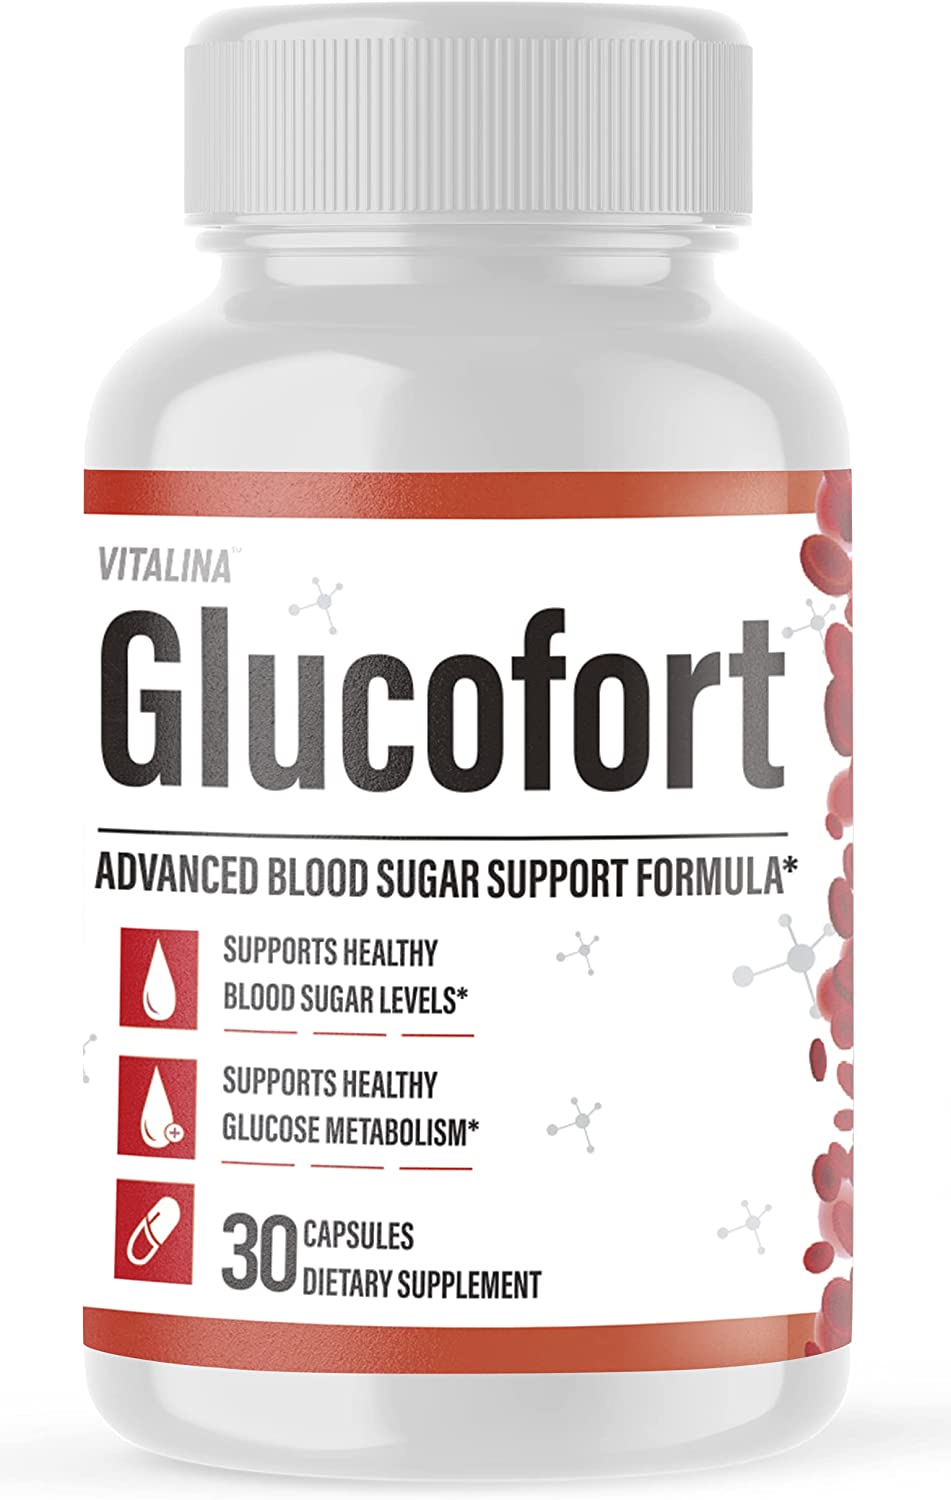 Glucofort Product Overview. What Is It?